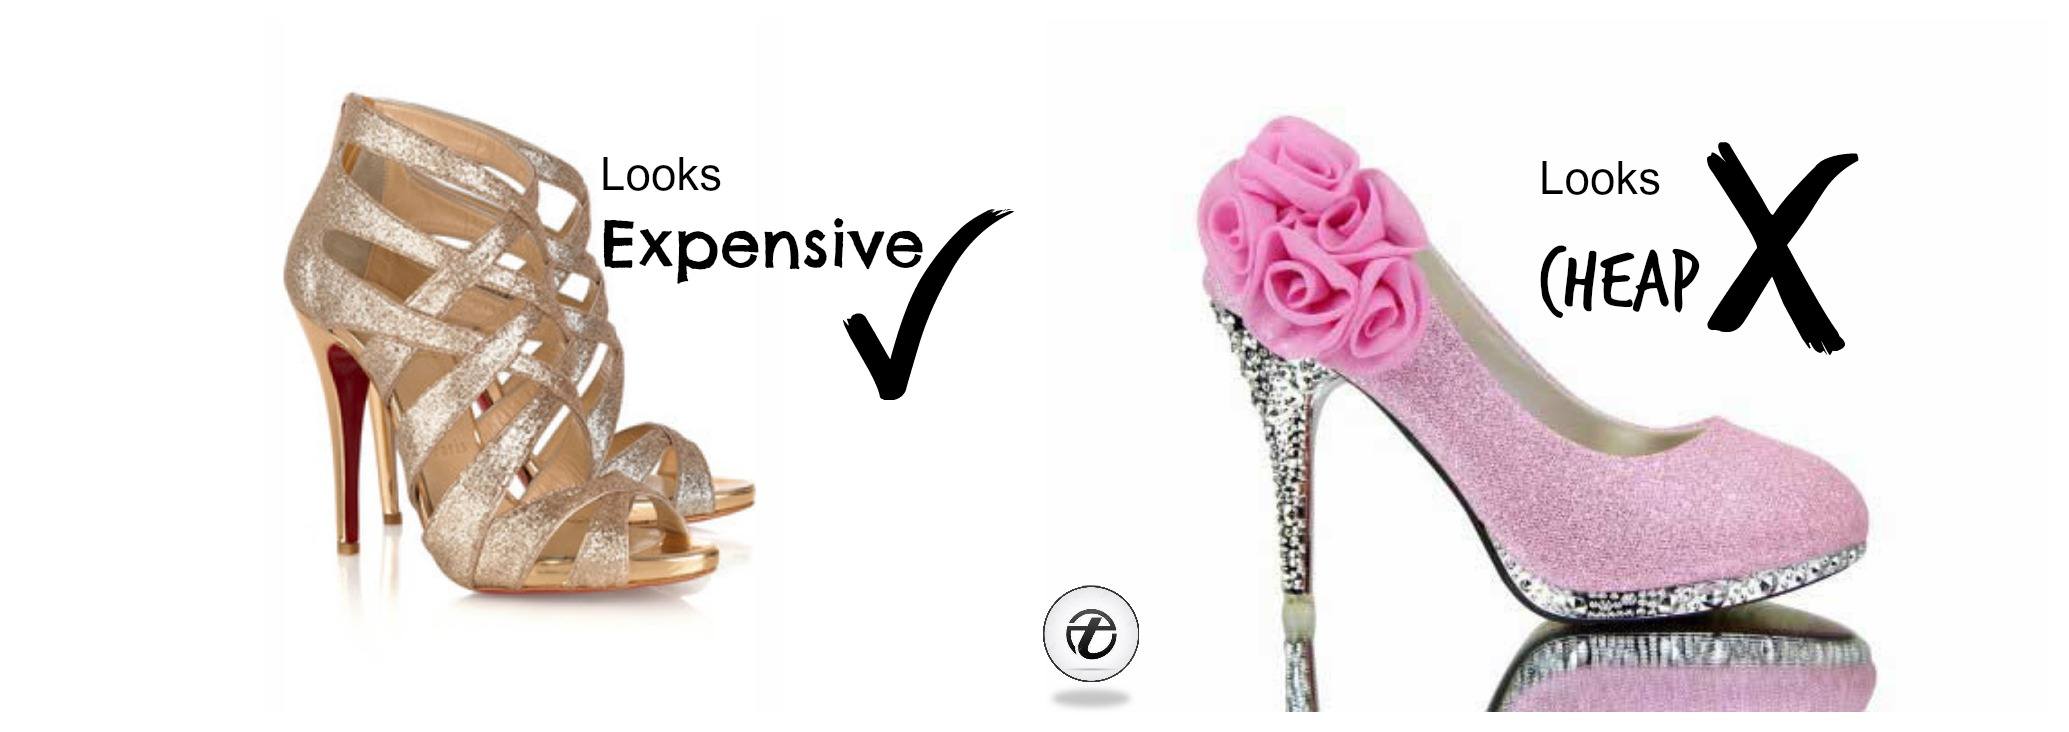 How to Make your Outfits look Expensive - 13 Pro Tips